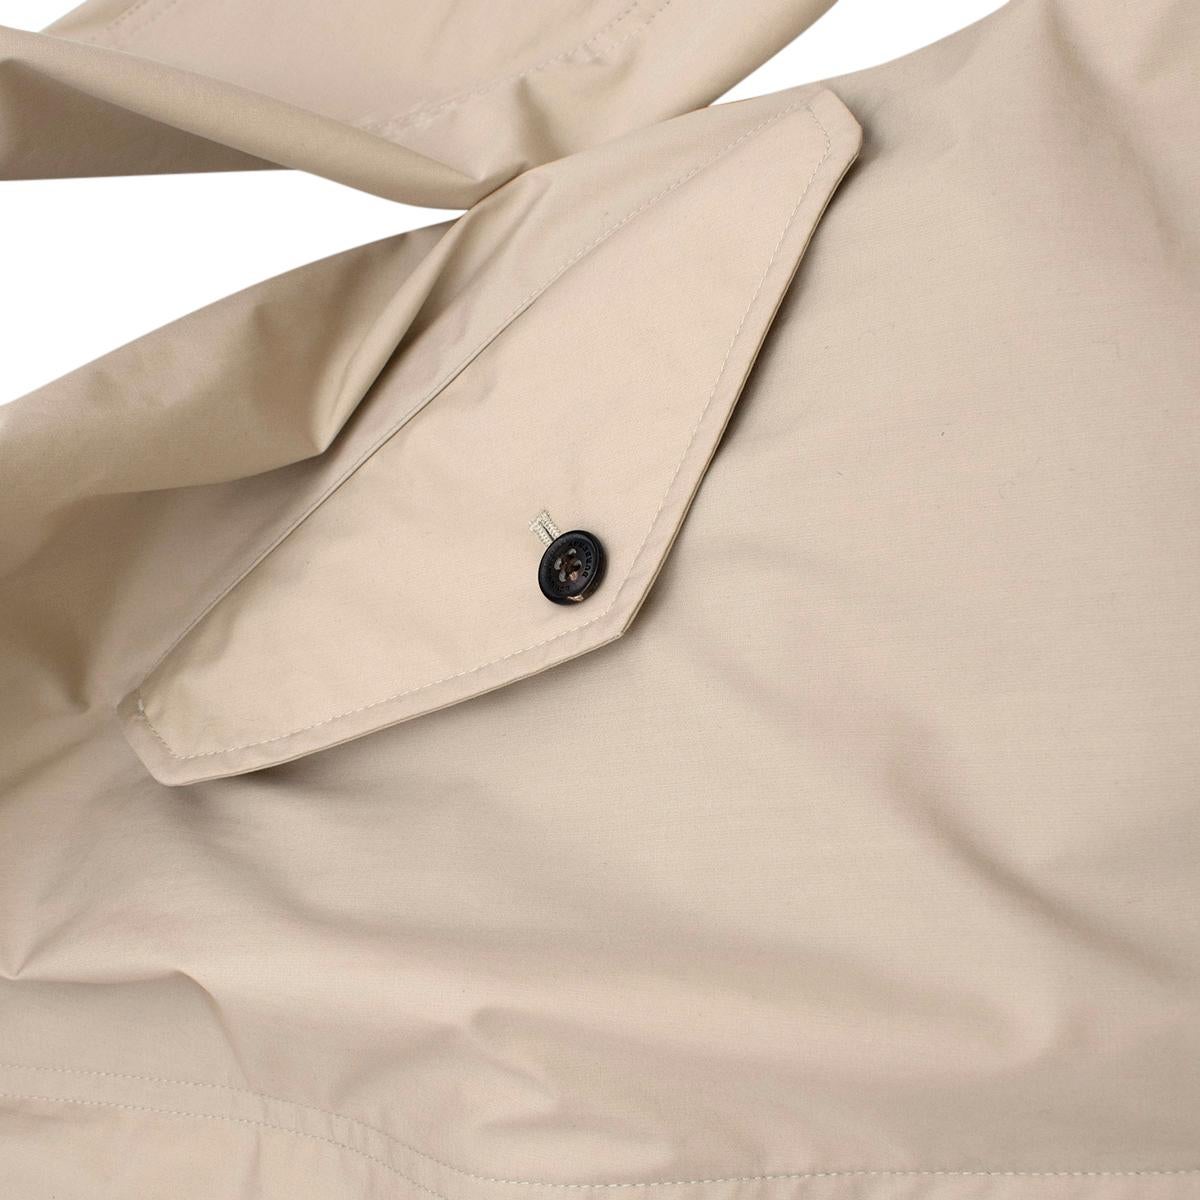 Burberry Stone Zip Trench Coat with Detachable Hood - US size 38 In Excellent Condition For Sale In London, GB